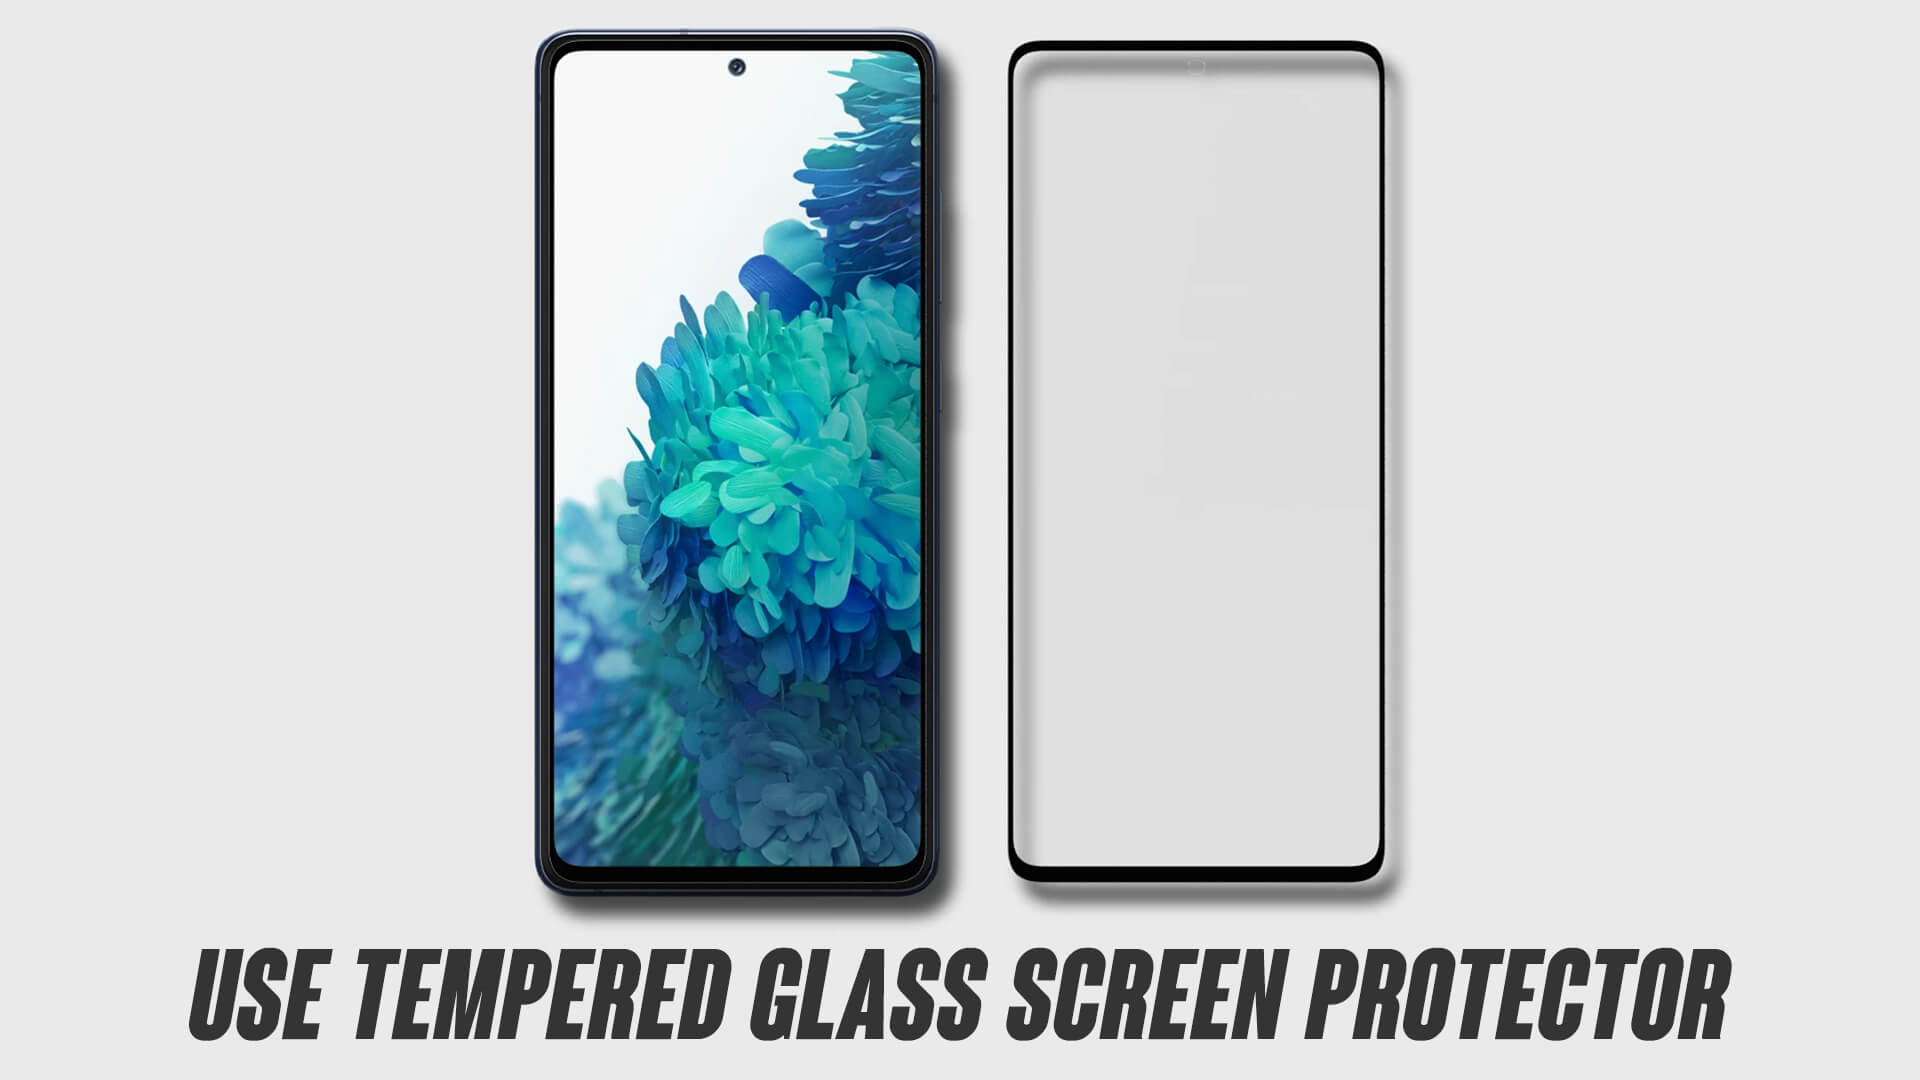 Tempered Glass Screen Protector For Smartphone